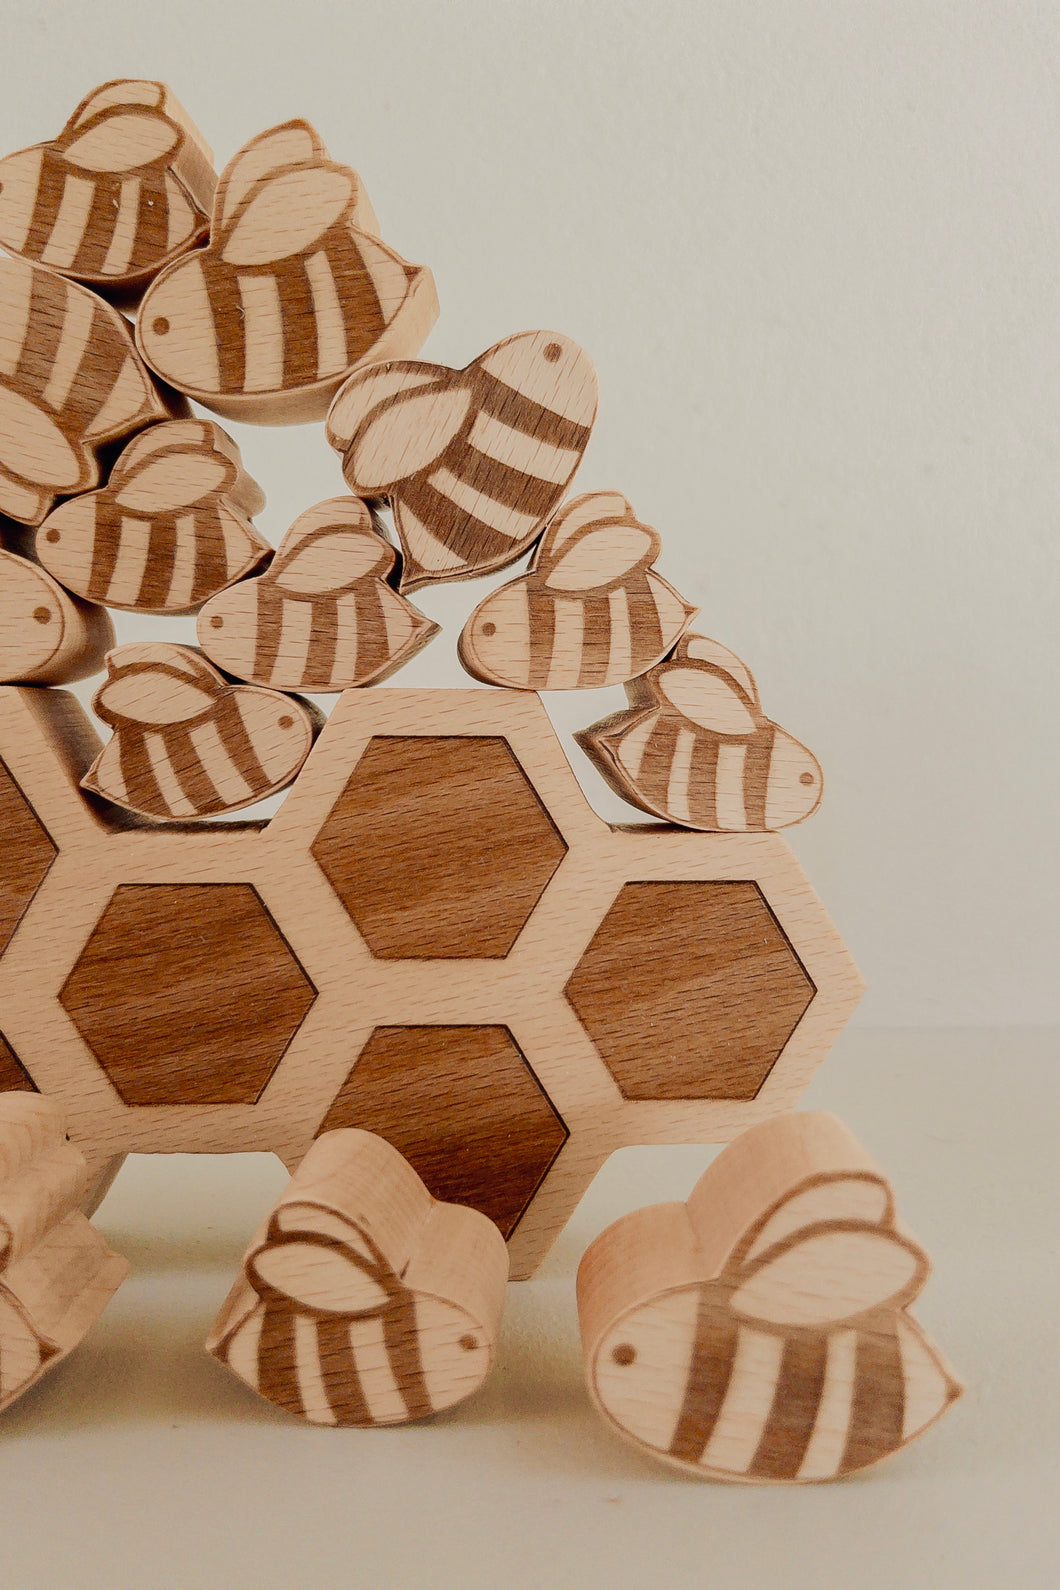 Bee hive balance and stacking toy